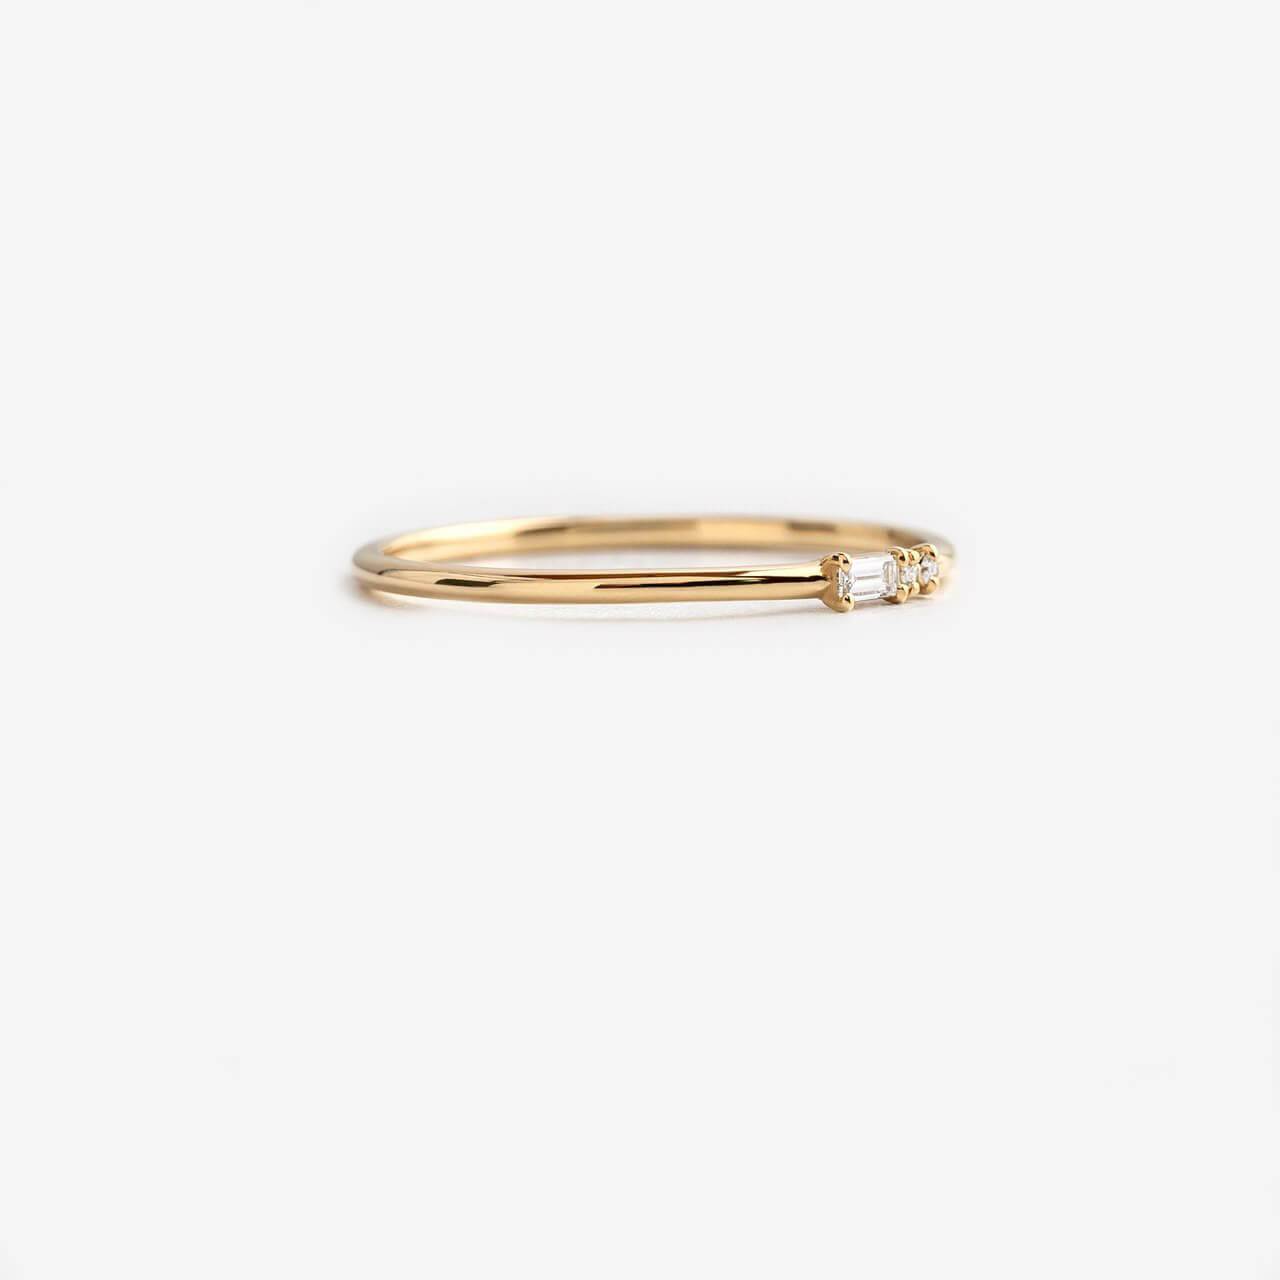 Morse Code Ring, Yellow Gold - Letter "B"